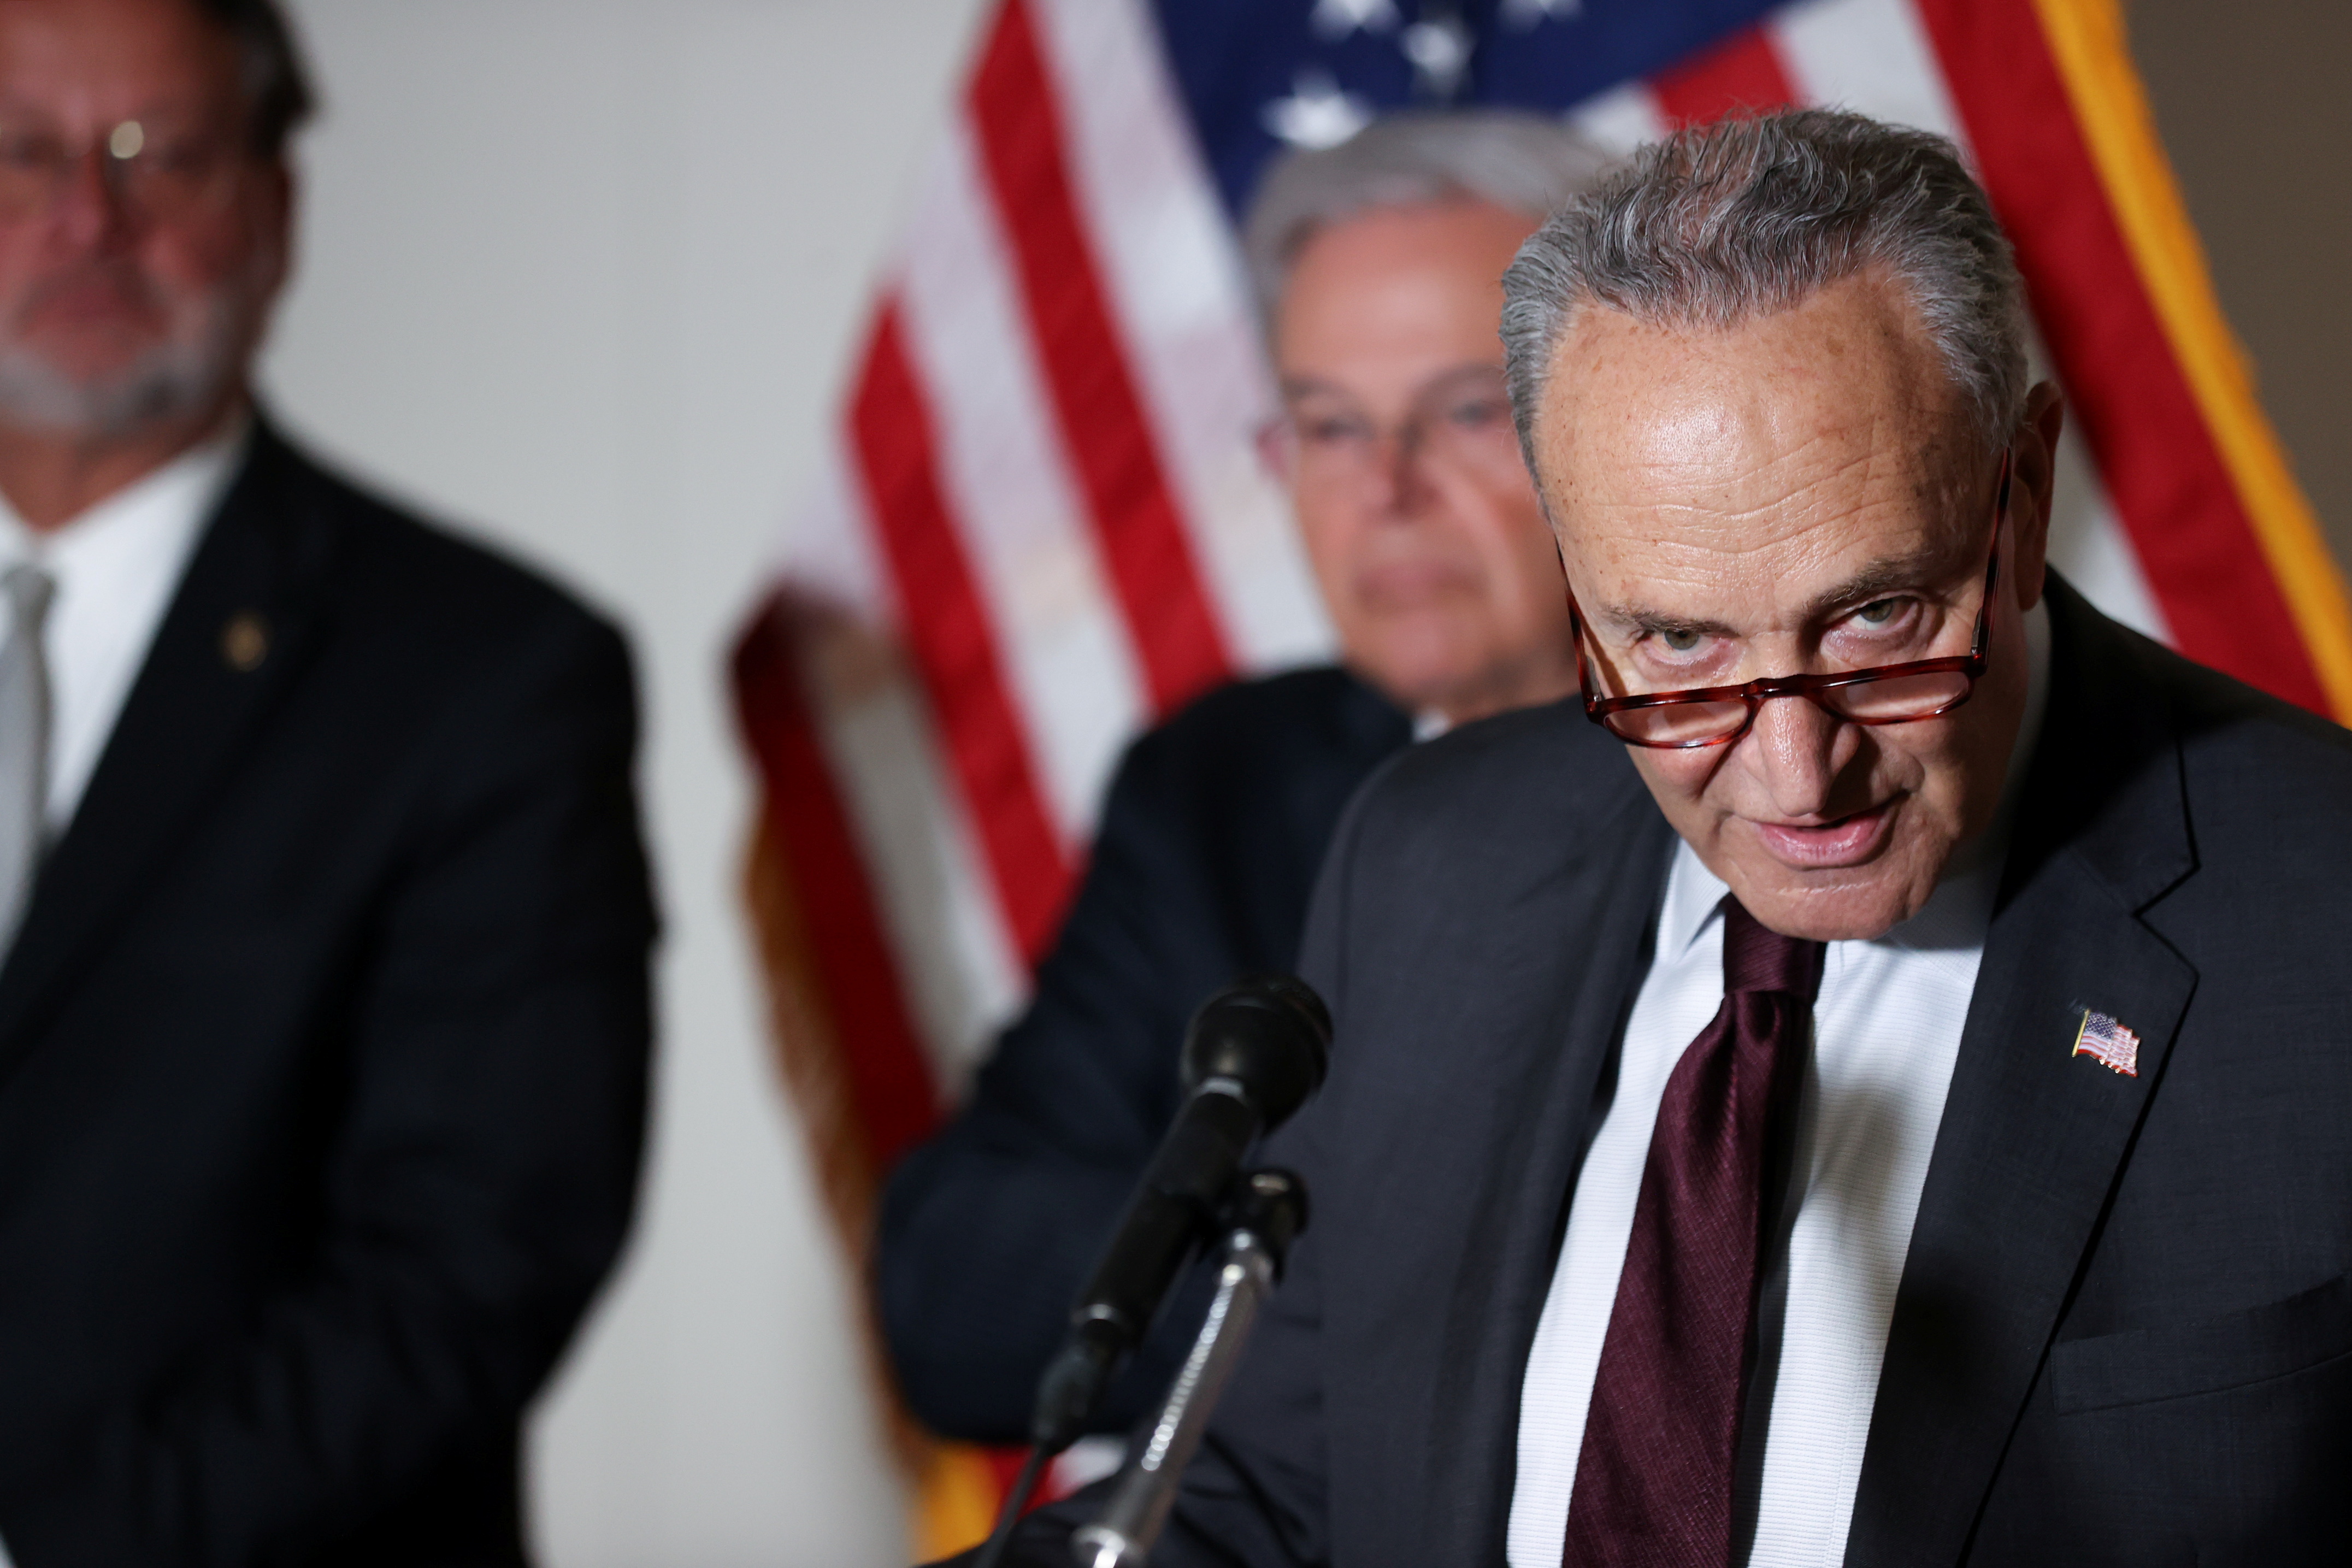 U.S. Senate Majority Leader Schumer speaks to reporters during the weekly news conference following the Democratic caucus policy luncheon on Capitol Hill in Washington